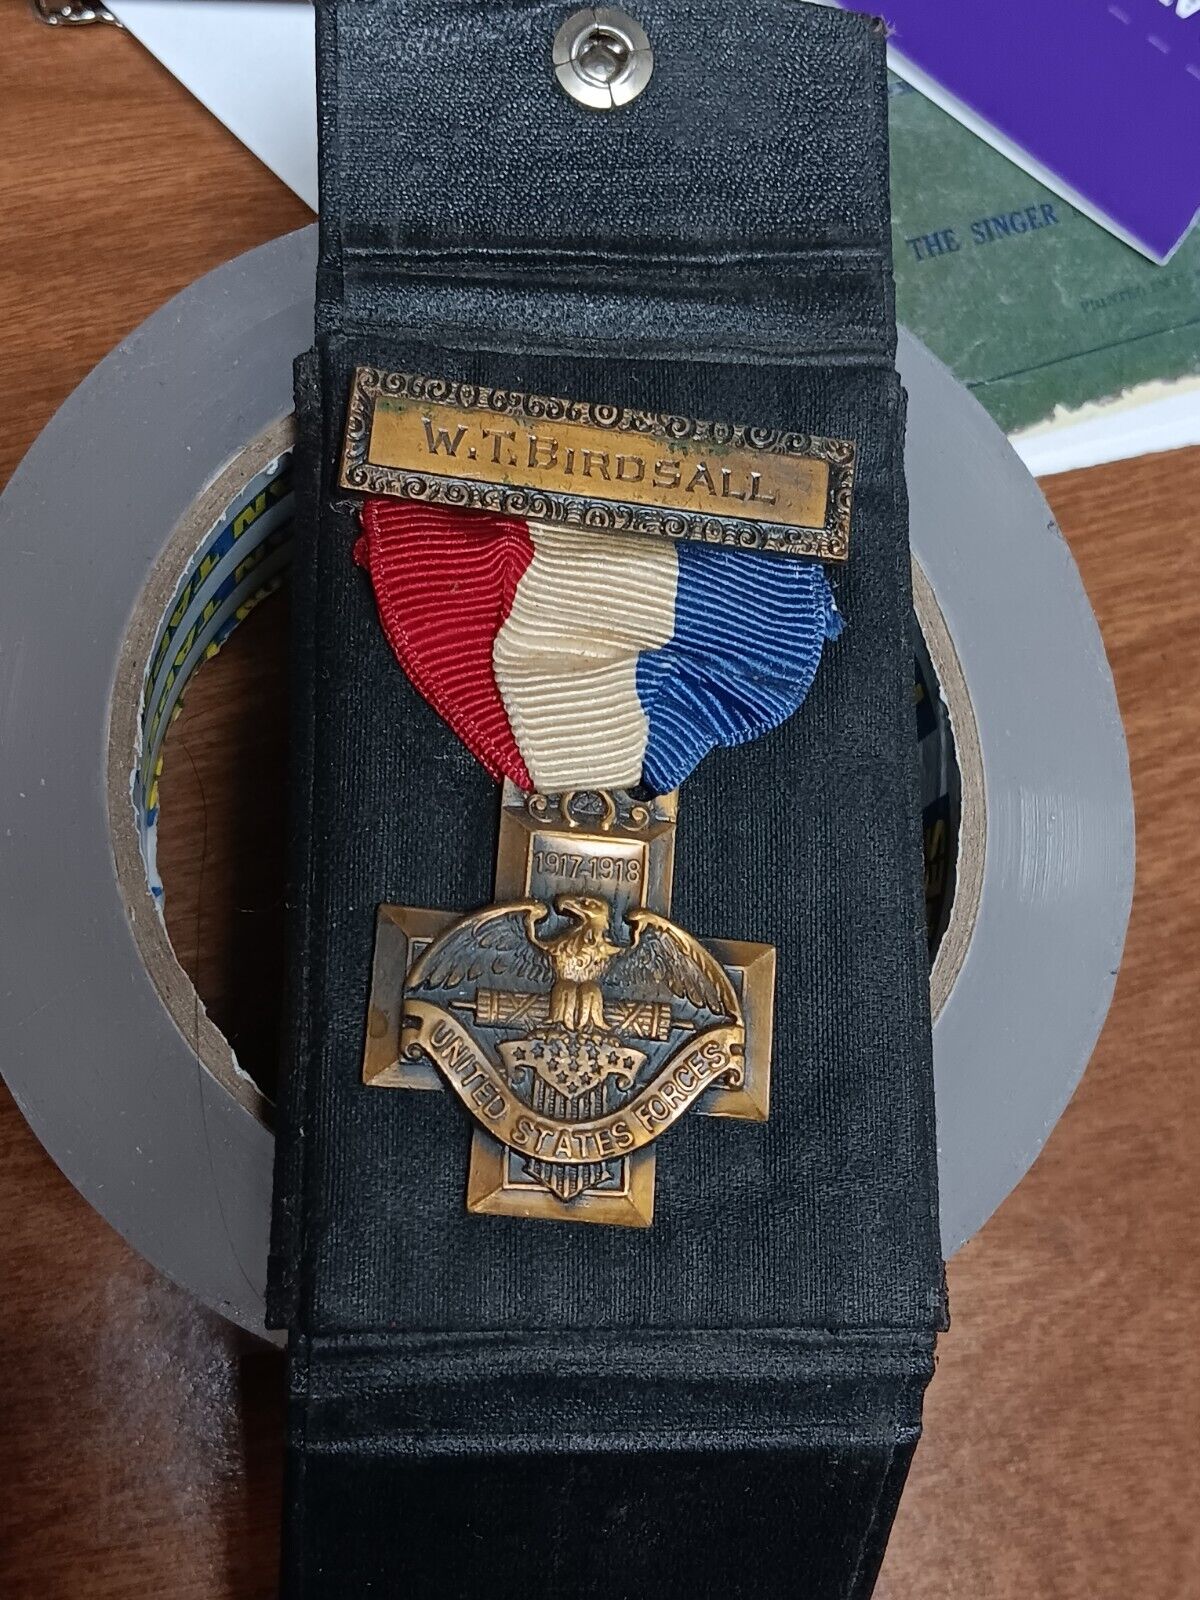 World War One United States Forces Medal from Montclair, NJ.   W.T. Birdsall